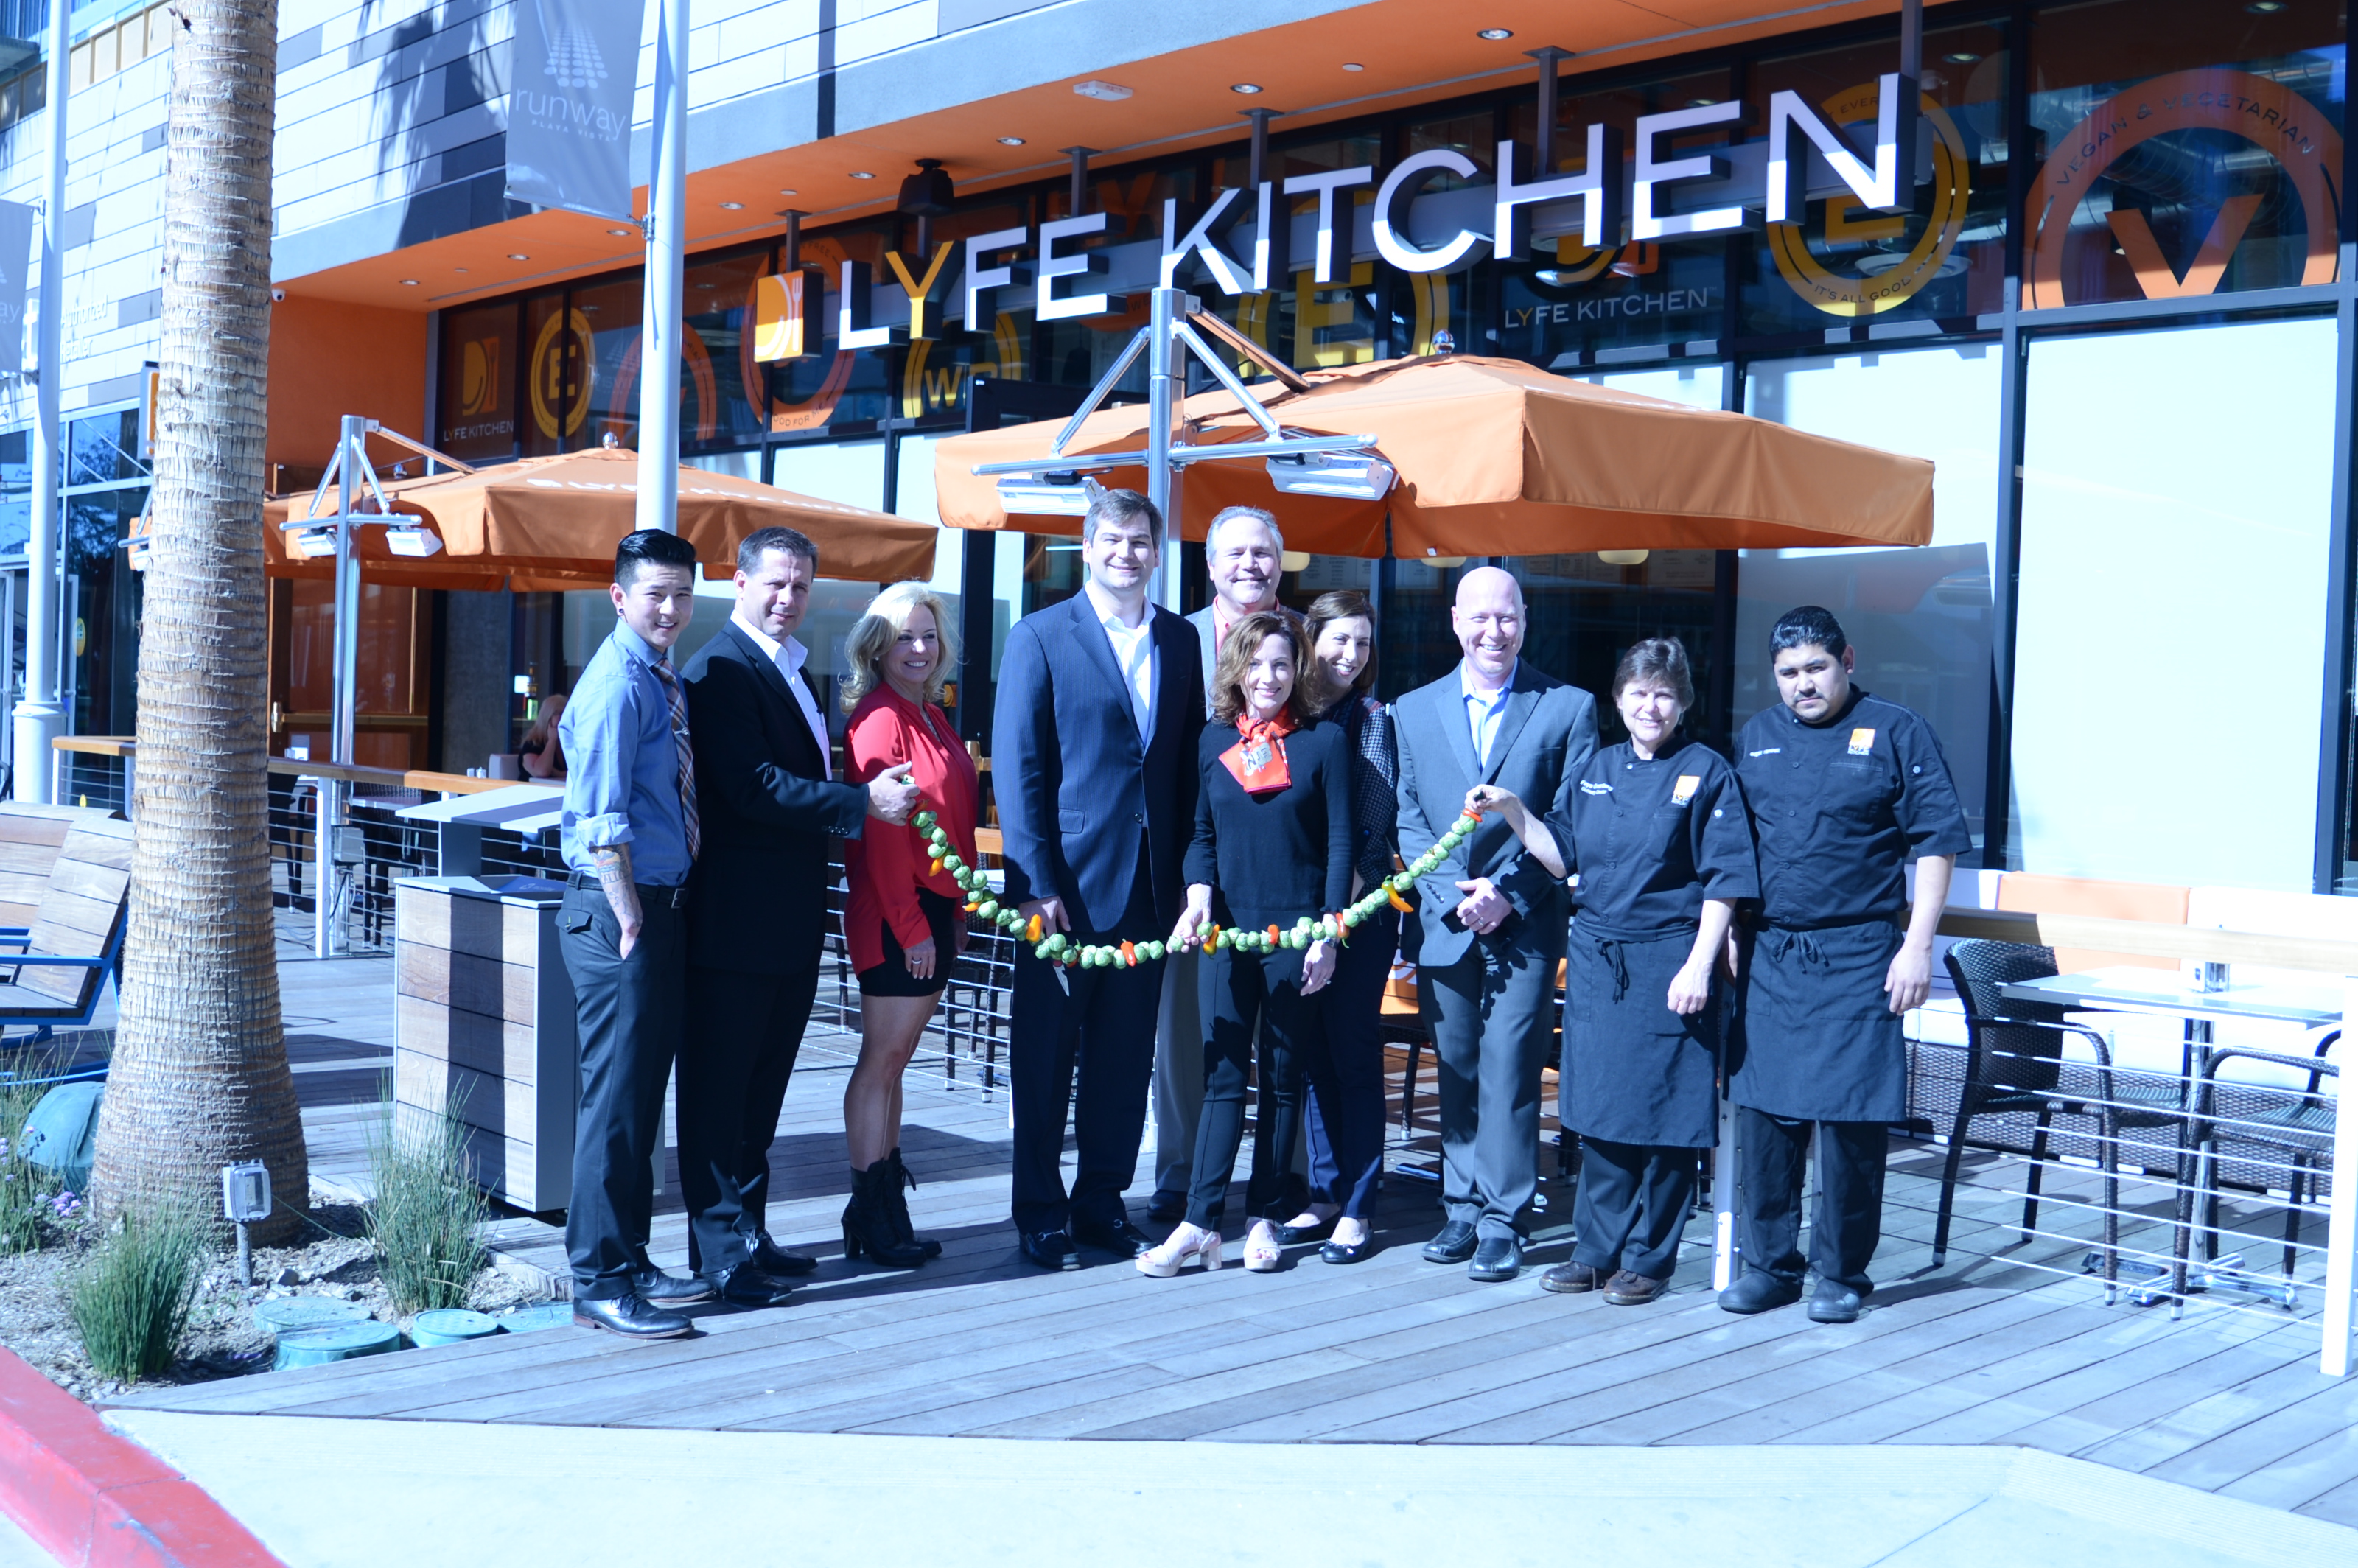 LYFE Kitchen Selects The Fearey Group And Bureau155